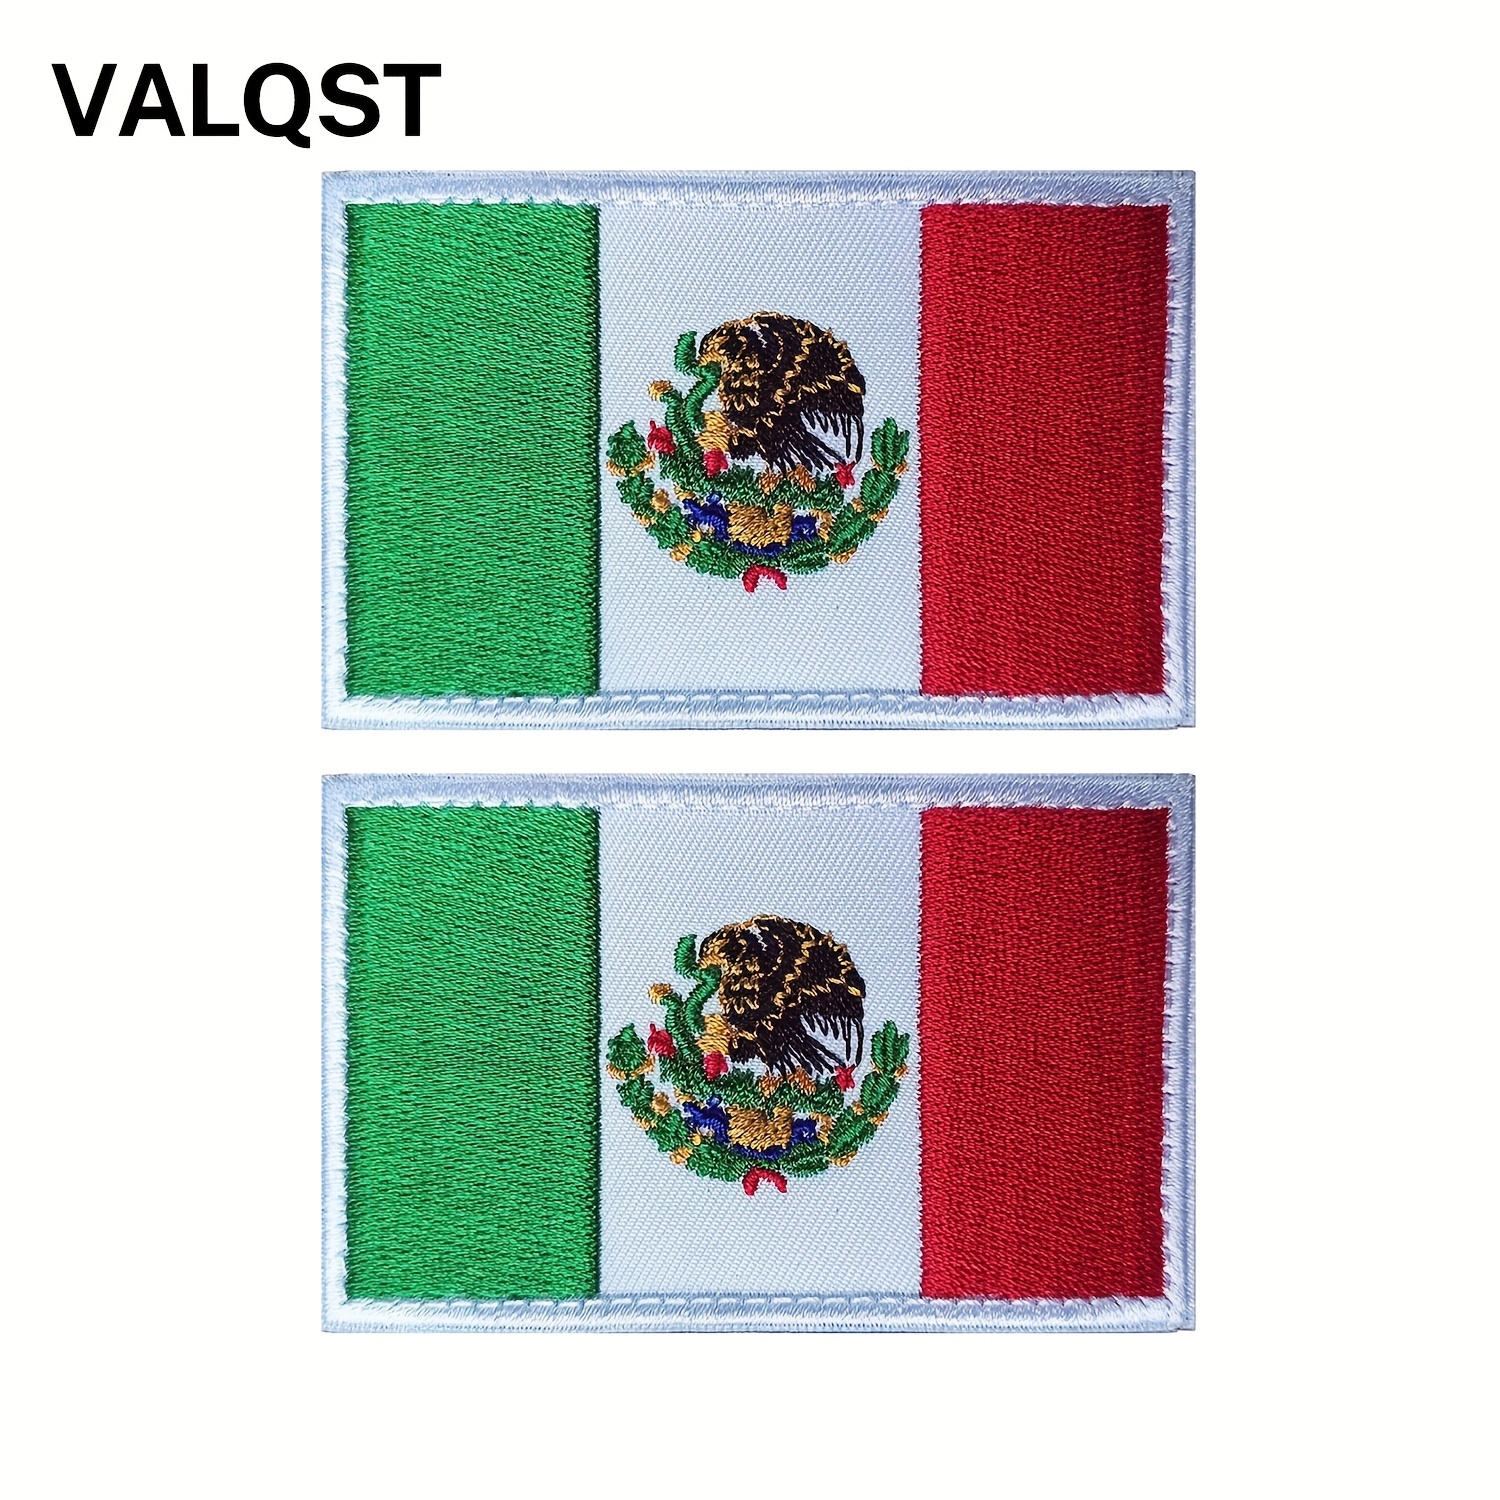 Mexico embroidered patches - country flag Mexico patches / iron on badges